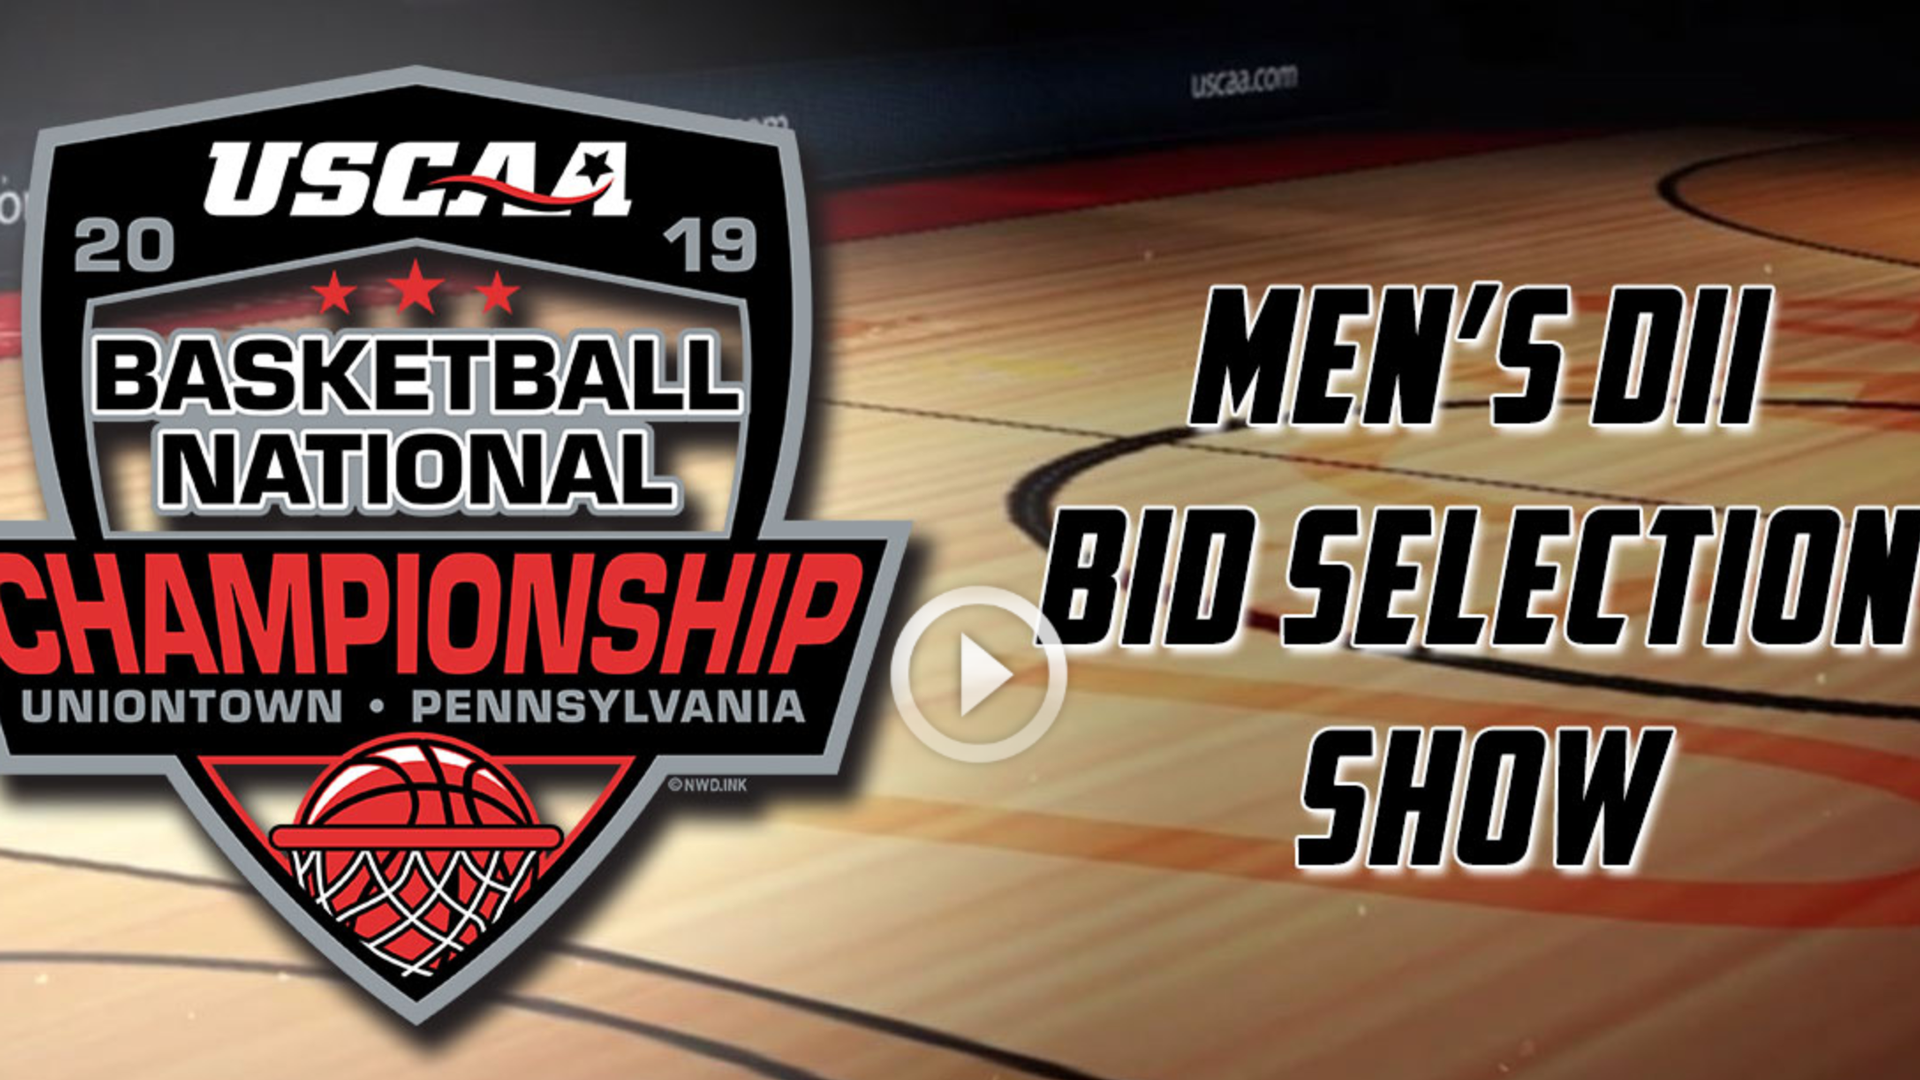 WATCH LIVE | YSCC teams competing in USCAA National Tournament